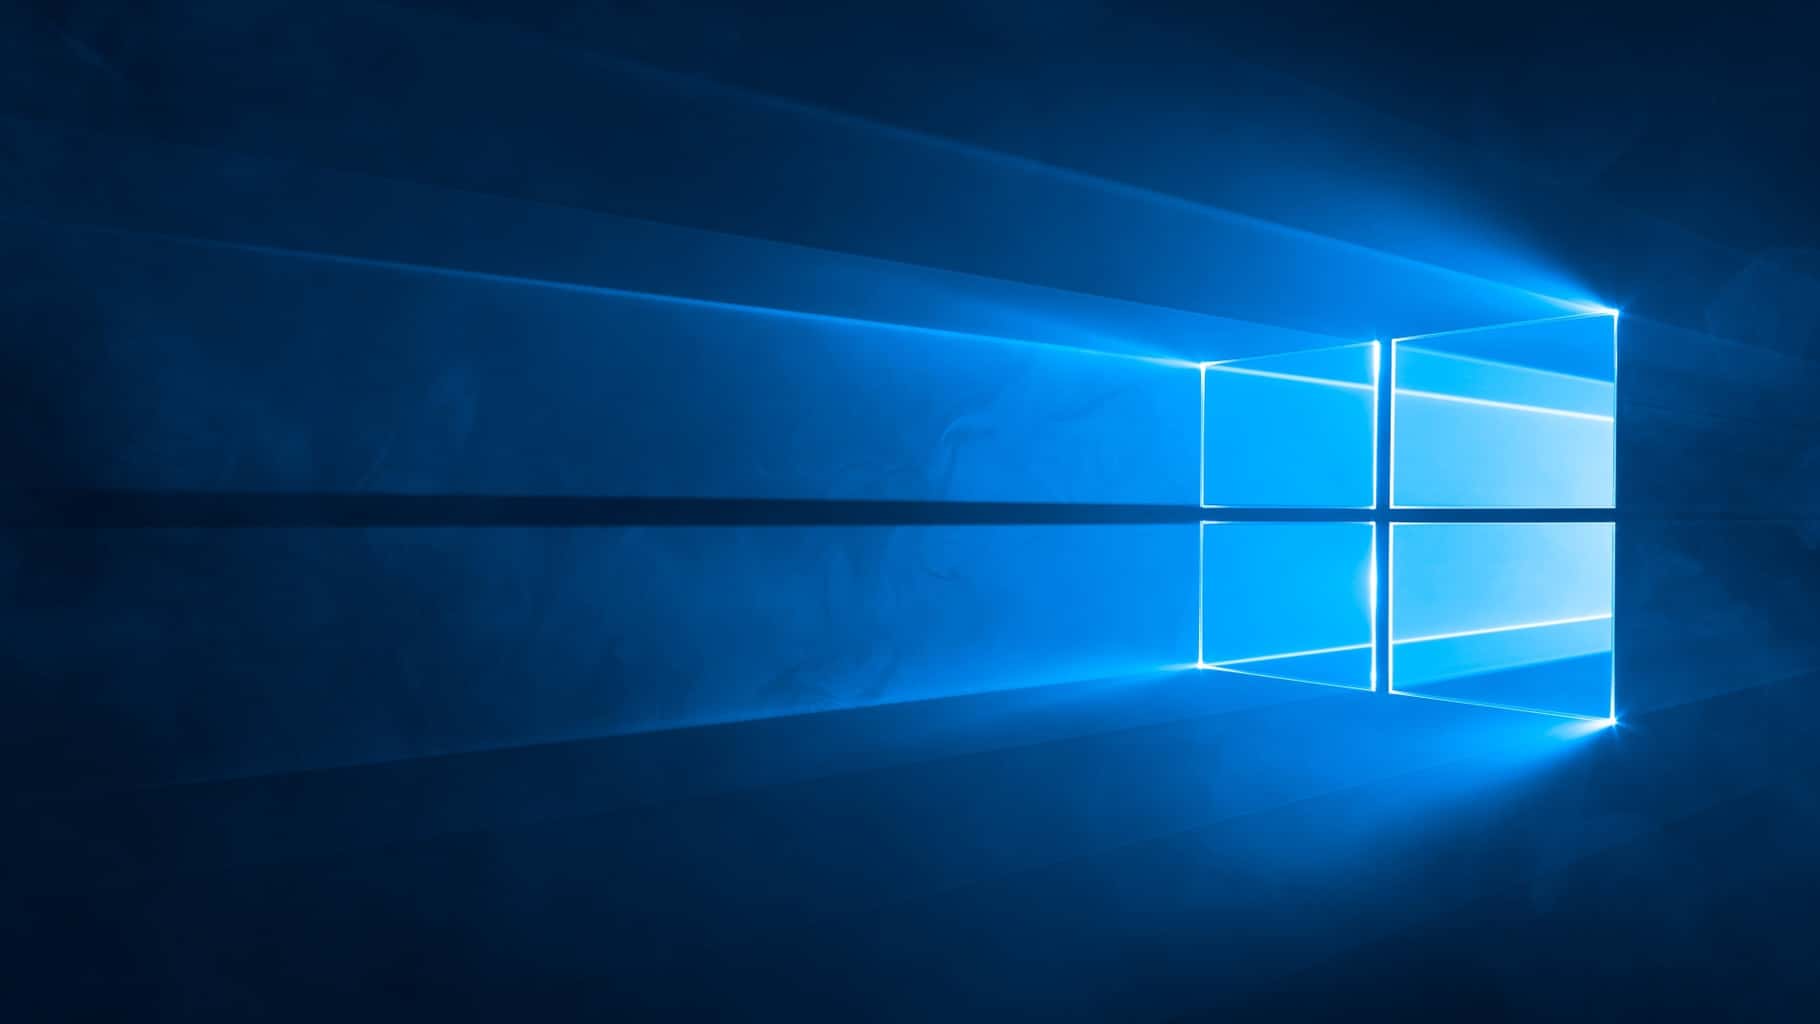 23 of the Best Windows 10 Wallpaper Backgrounds